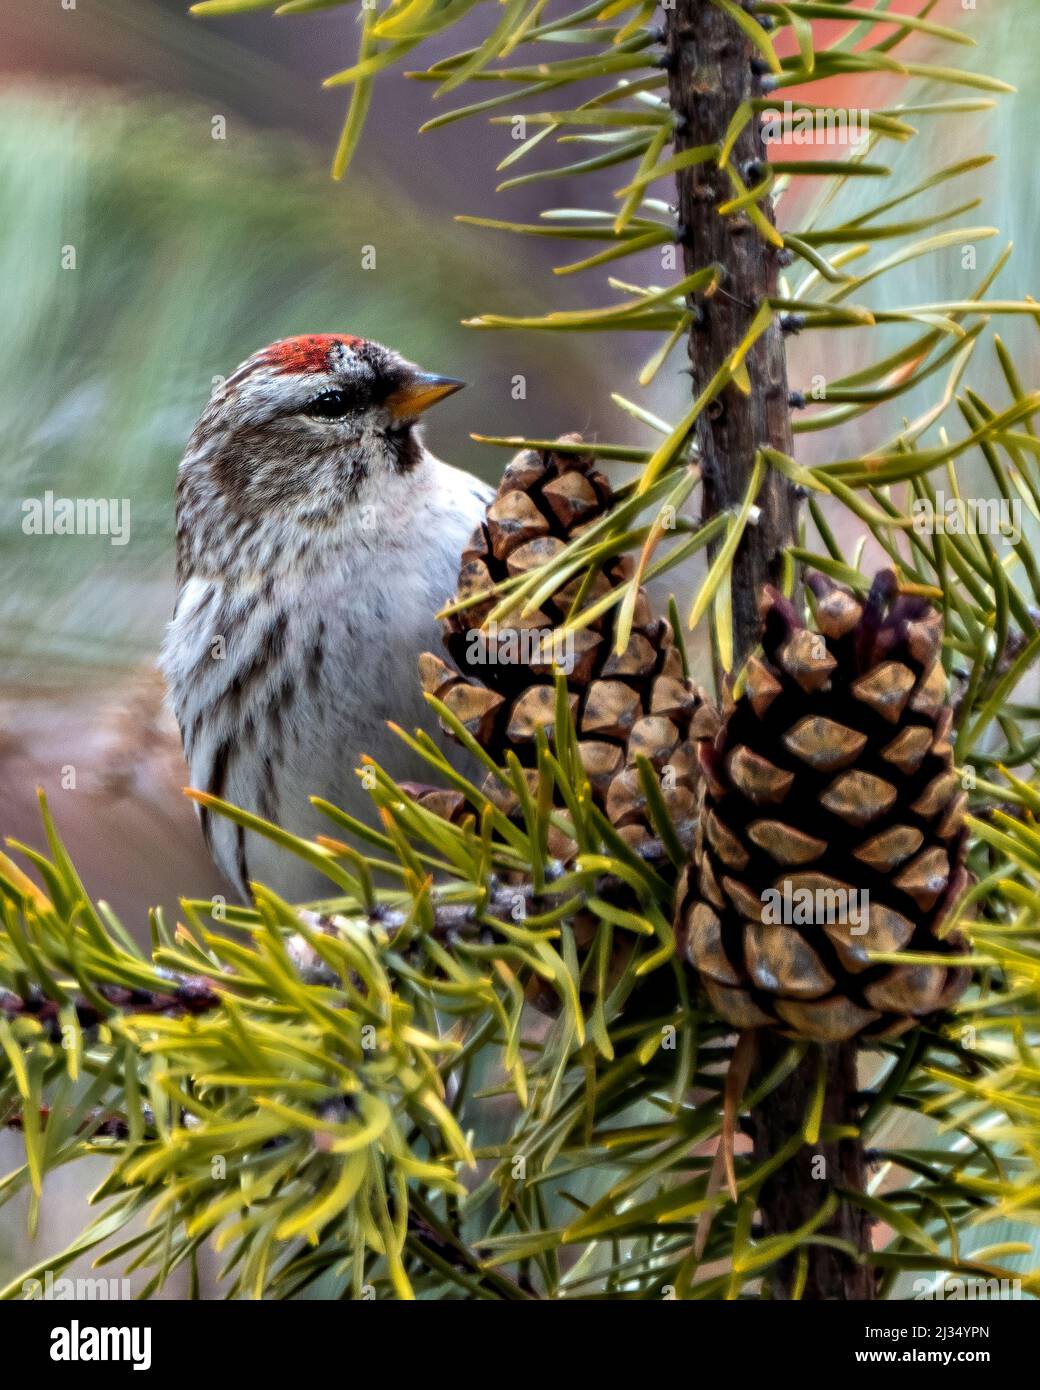 Red poll close-up profile view, perched on a pine branch with  pine cones and blur background in its environment and habitat surrounding. Stock Photo